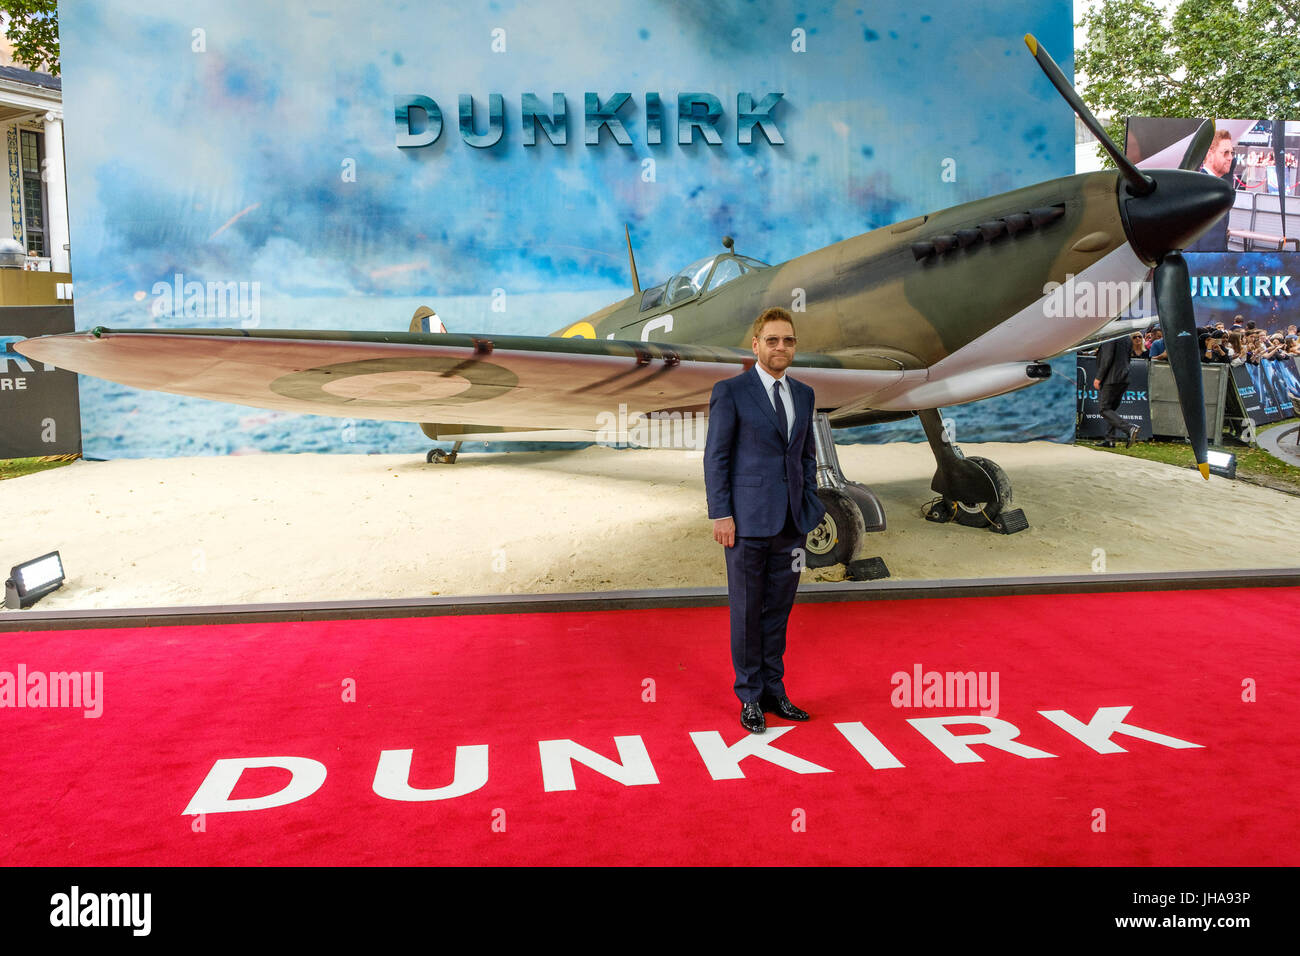 London, UK. 13th July, 2017. Kenneth Branagh at World Premiere of DUNKIRK on Thursday 13 July 2017 held at ODEON Leicester Square, London. Pictured: Kenneth Branagh. Credit: Julie Edwards/Alamy Live News Stock Photo